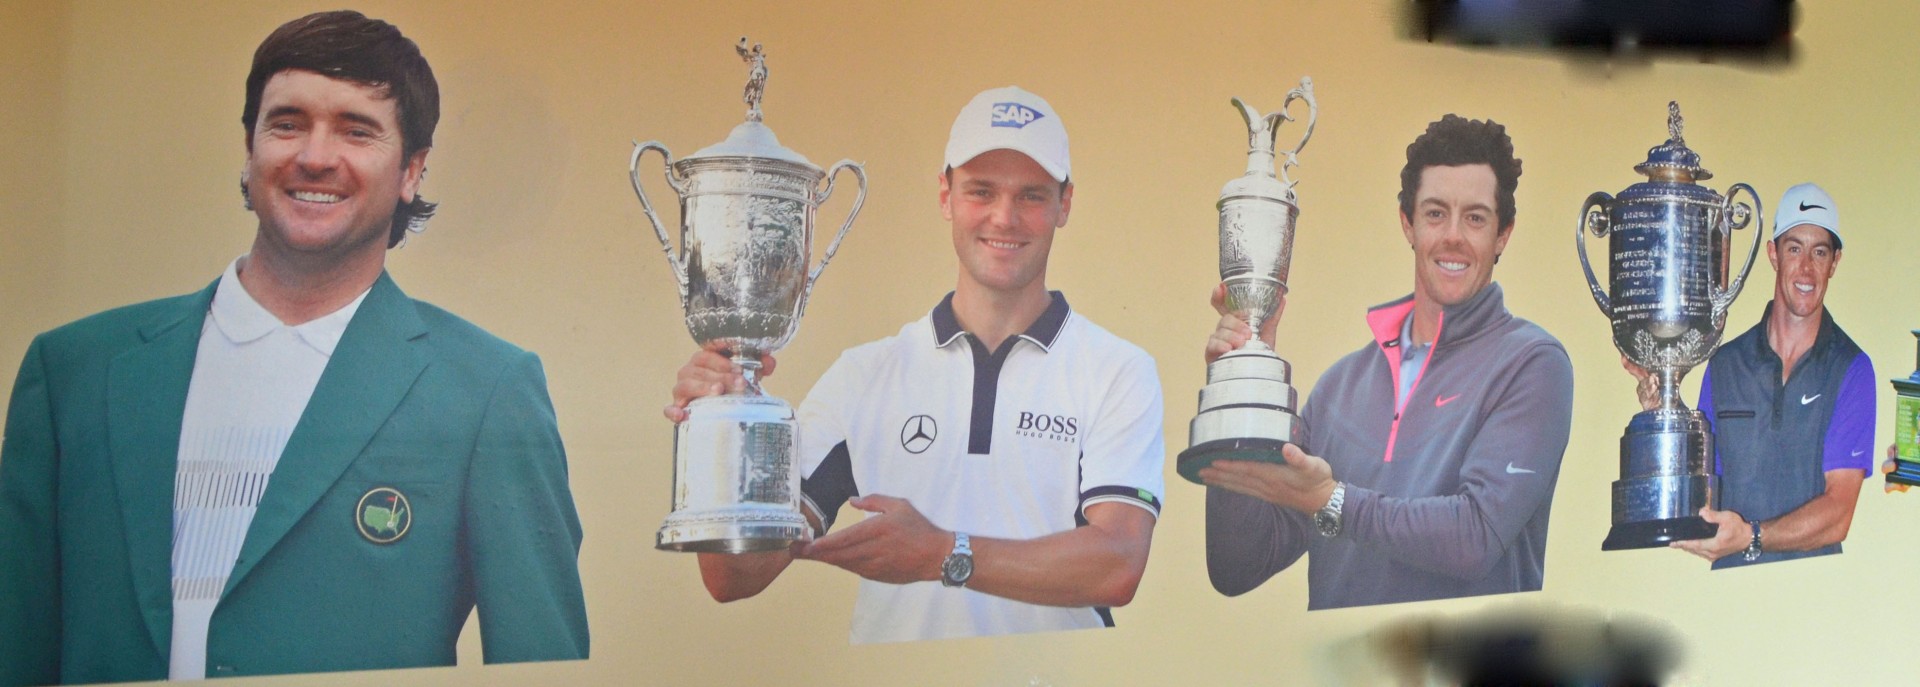 2014 Major Winners at Port Royal Golf Course